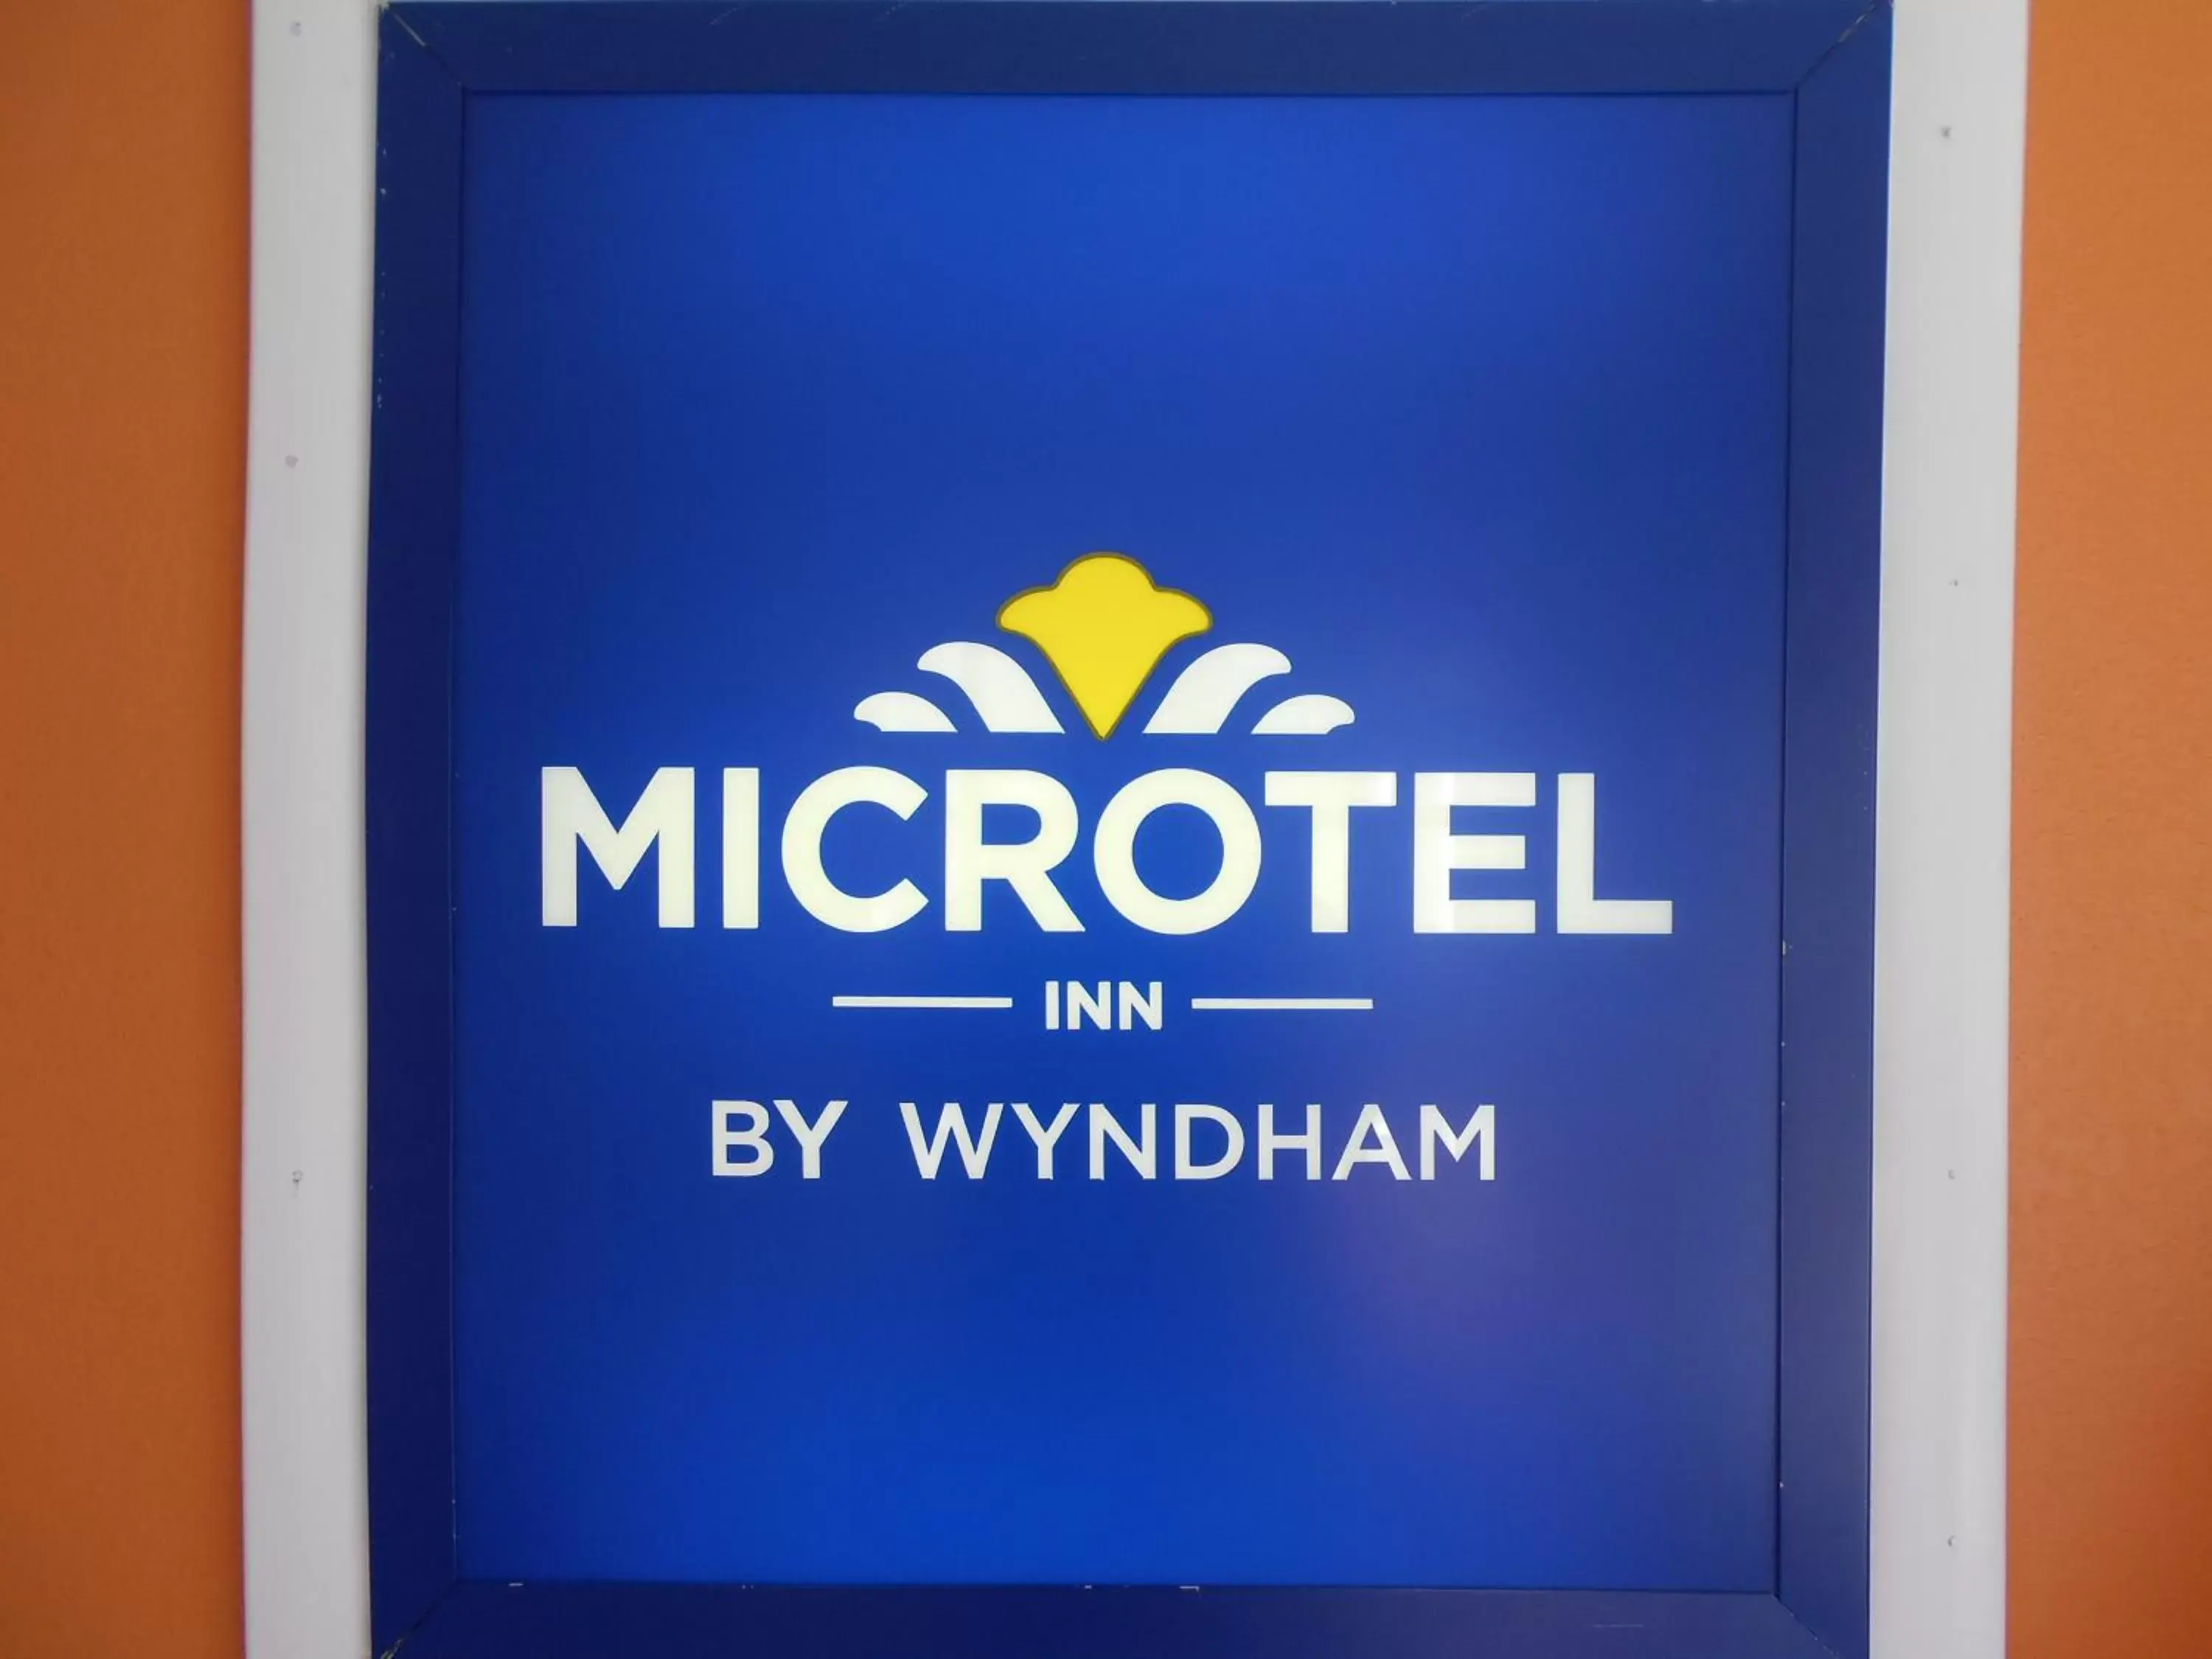 Property logo or sign, Logo/Certificate/Sign/Award in Microtel Inn by Wyndham - Albany Airport